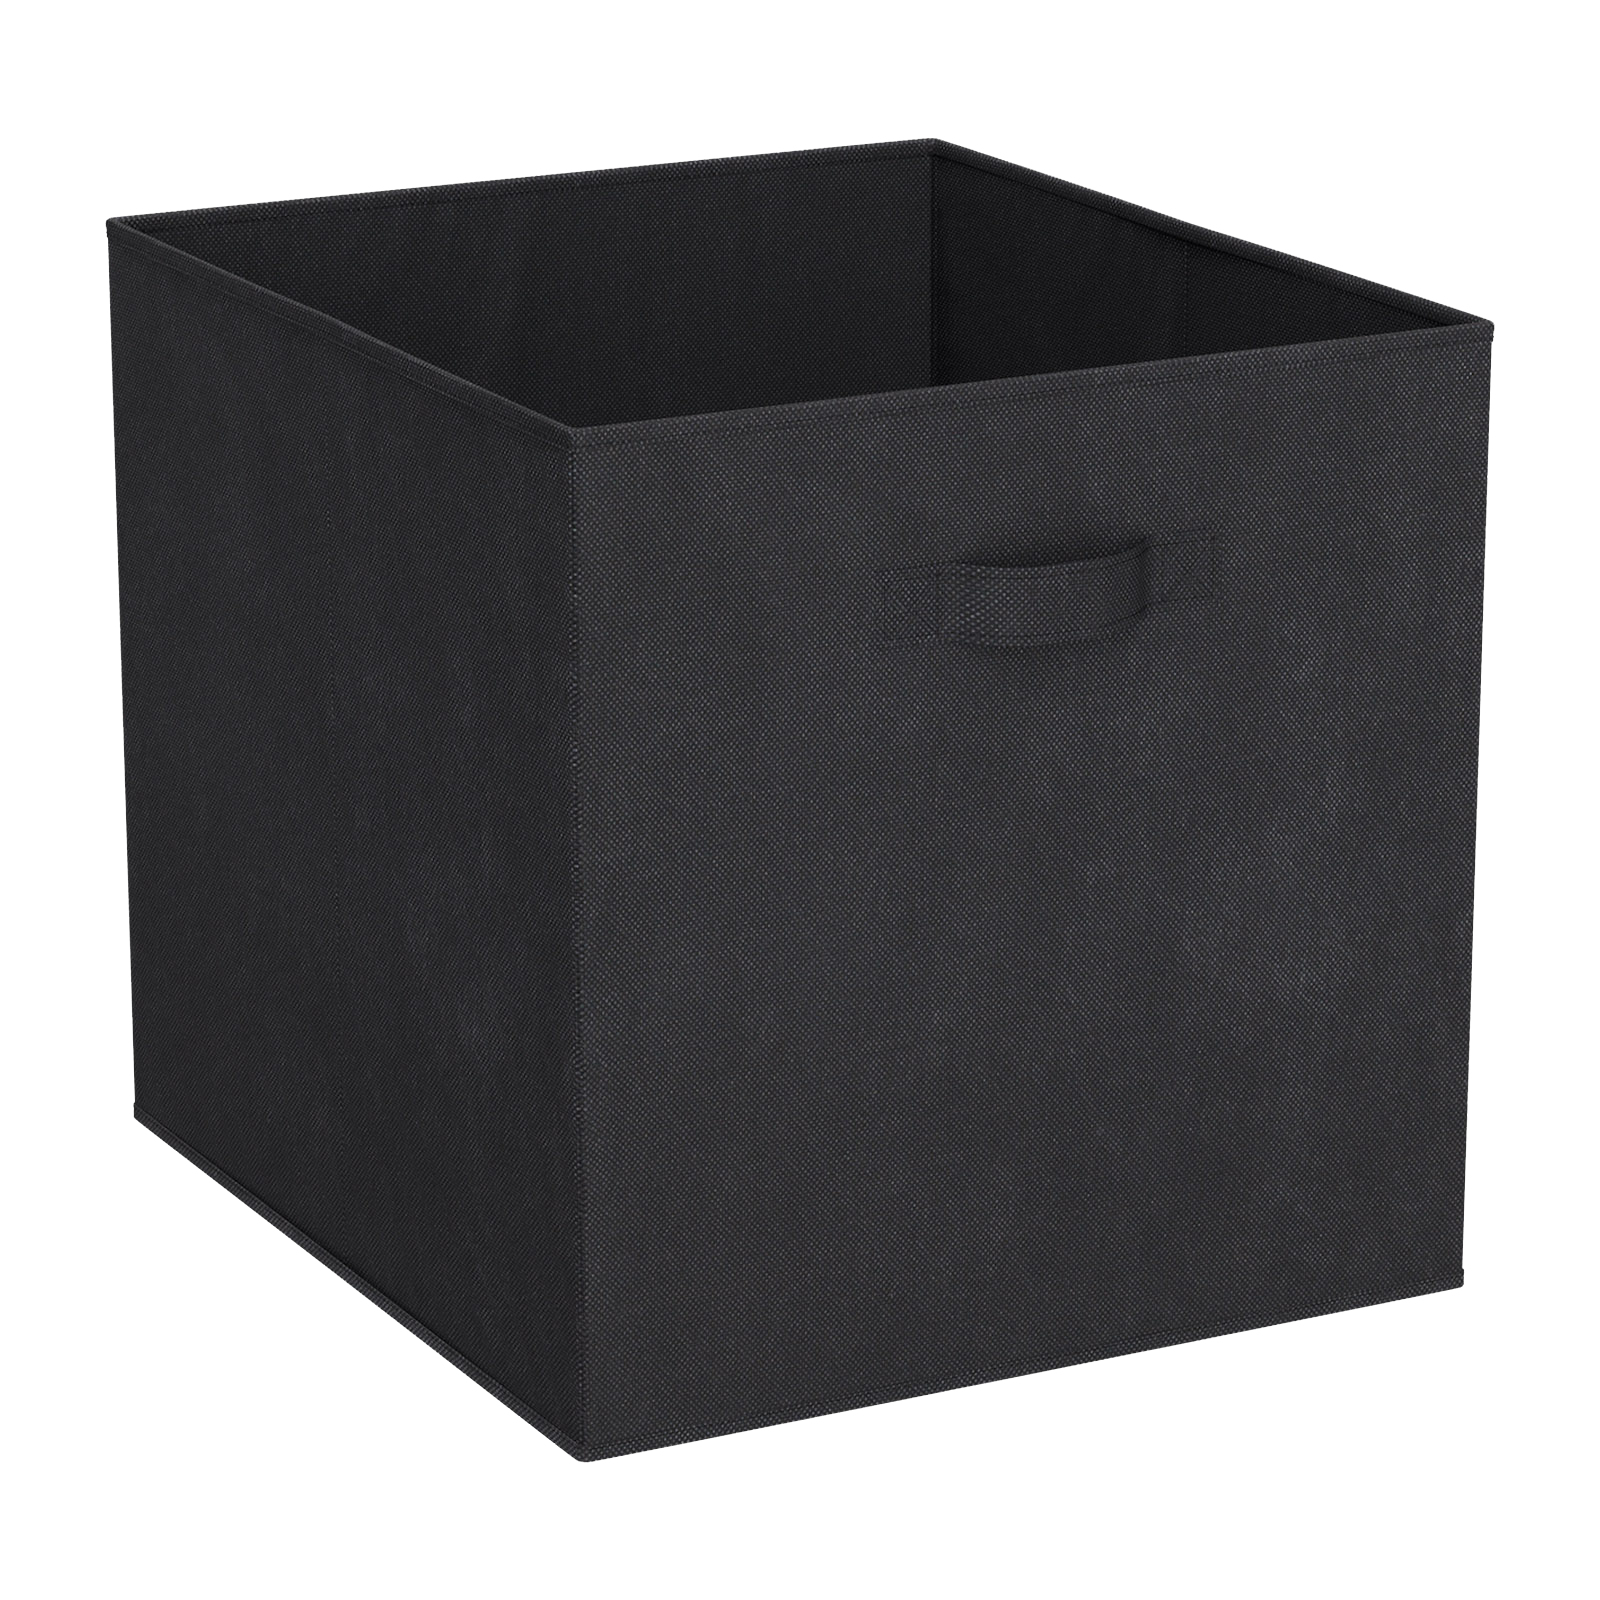 Clever Cube Fabric Insert Black